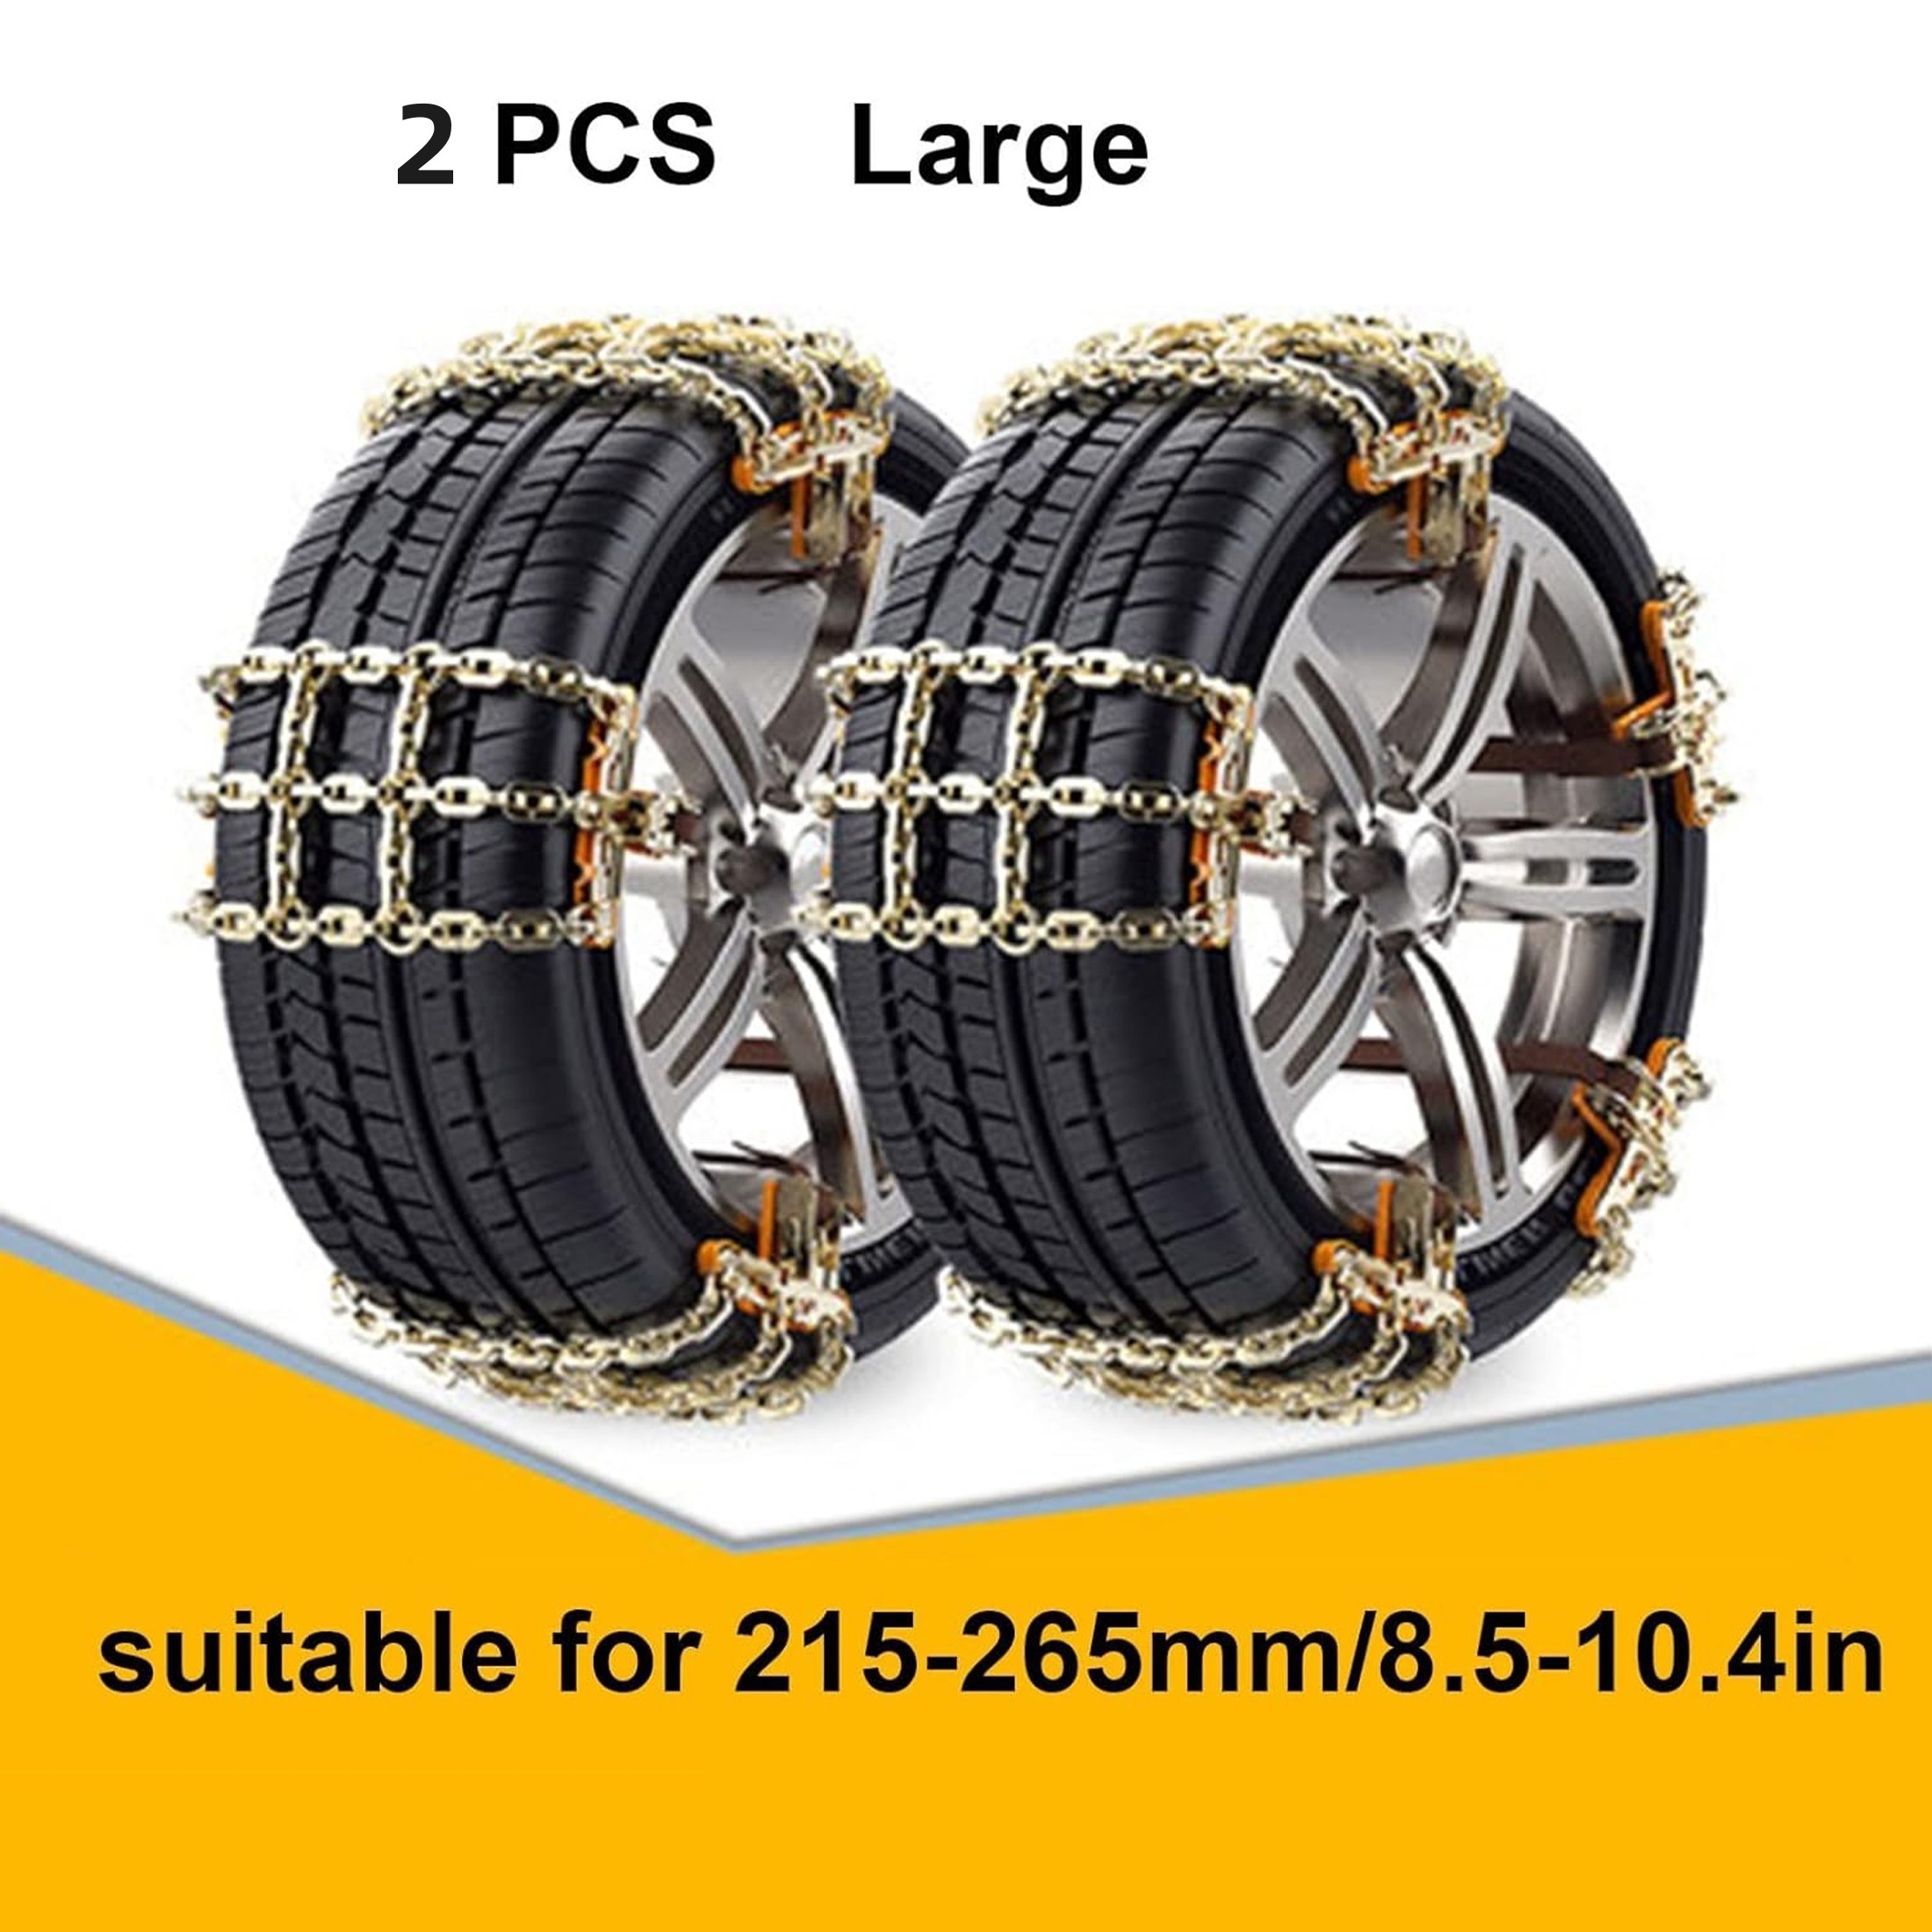 Snow Tire Chains for Car - 10 Pcs Portable Tires Traction Nylon Anti-skid  Chain Belt Universal Adjustable Easy to Install Winter Emergency  Accessories